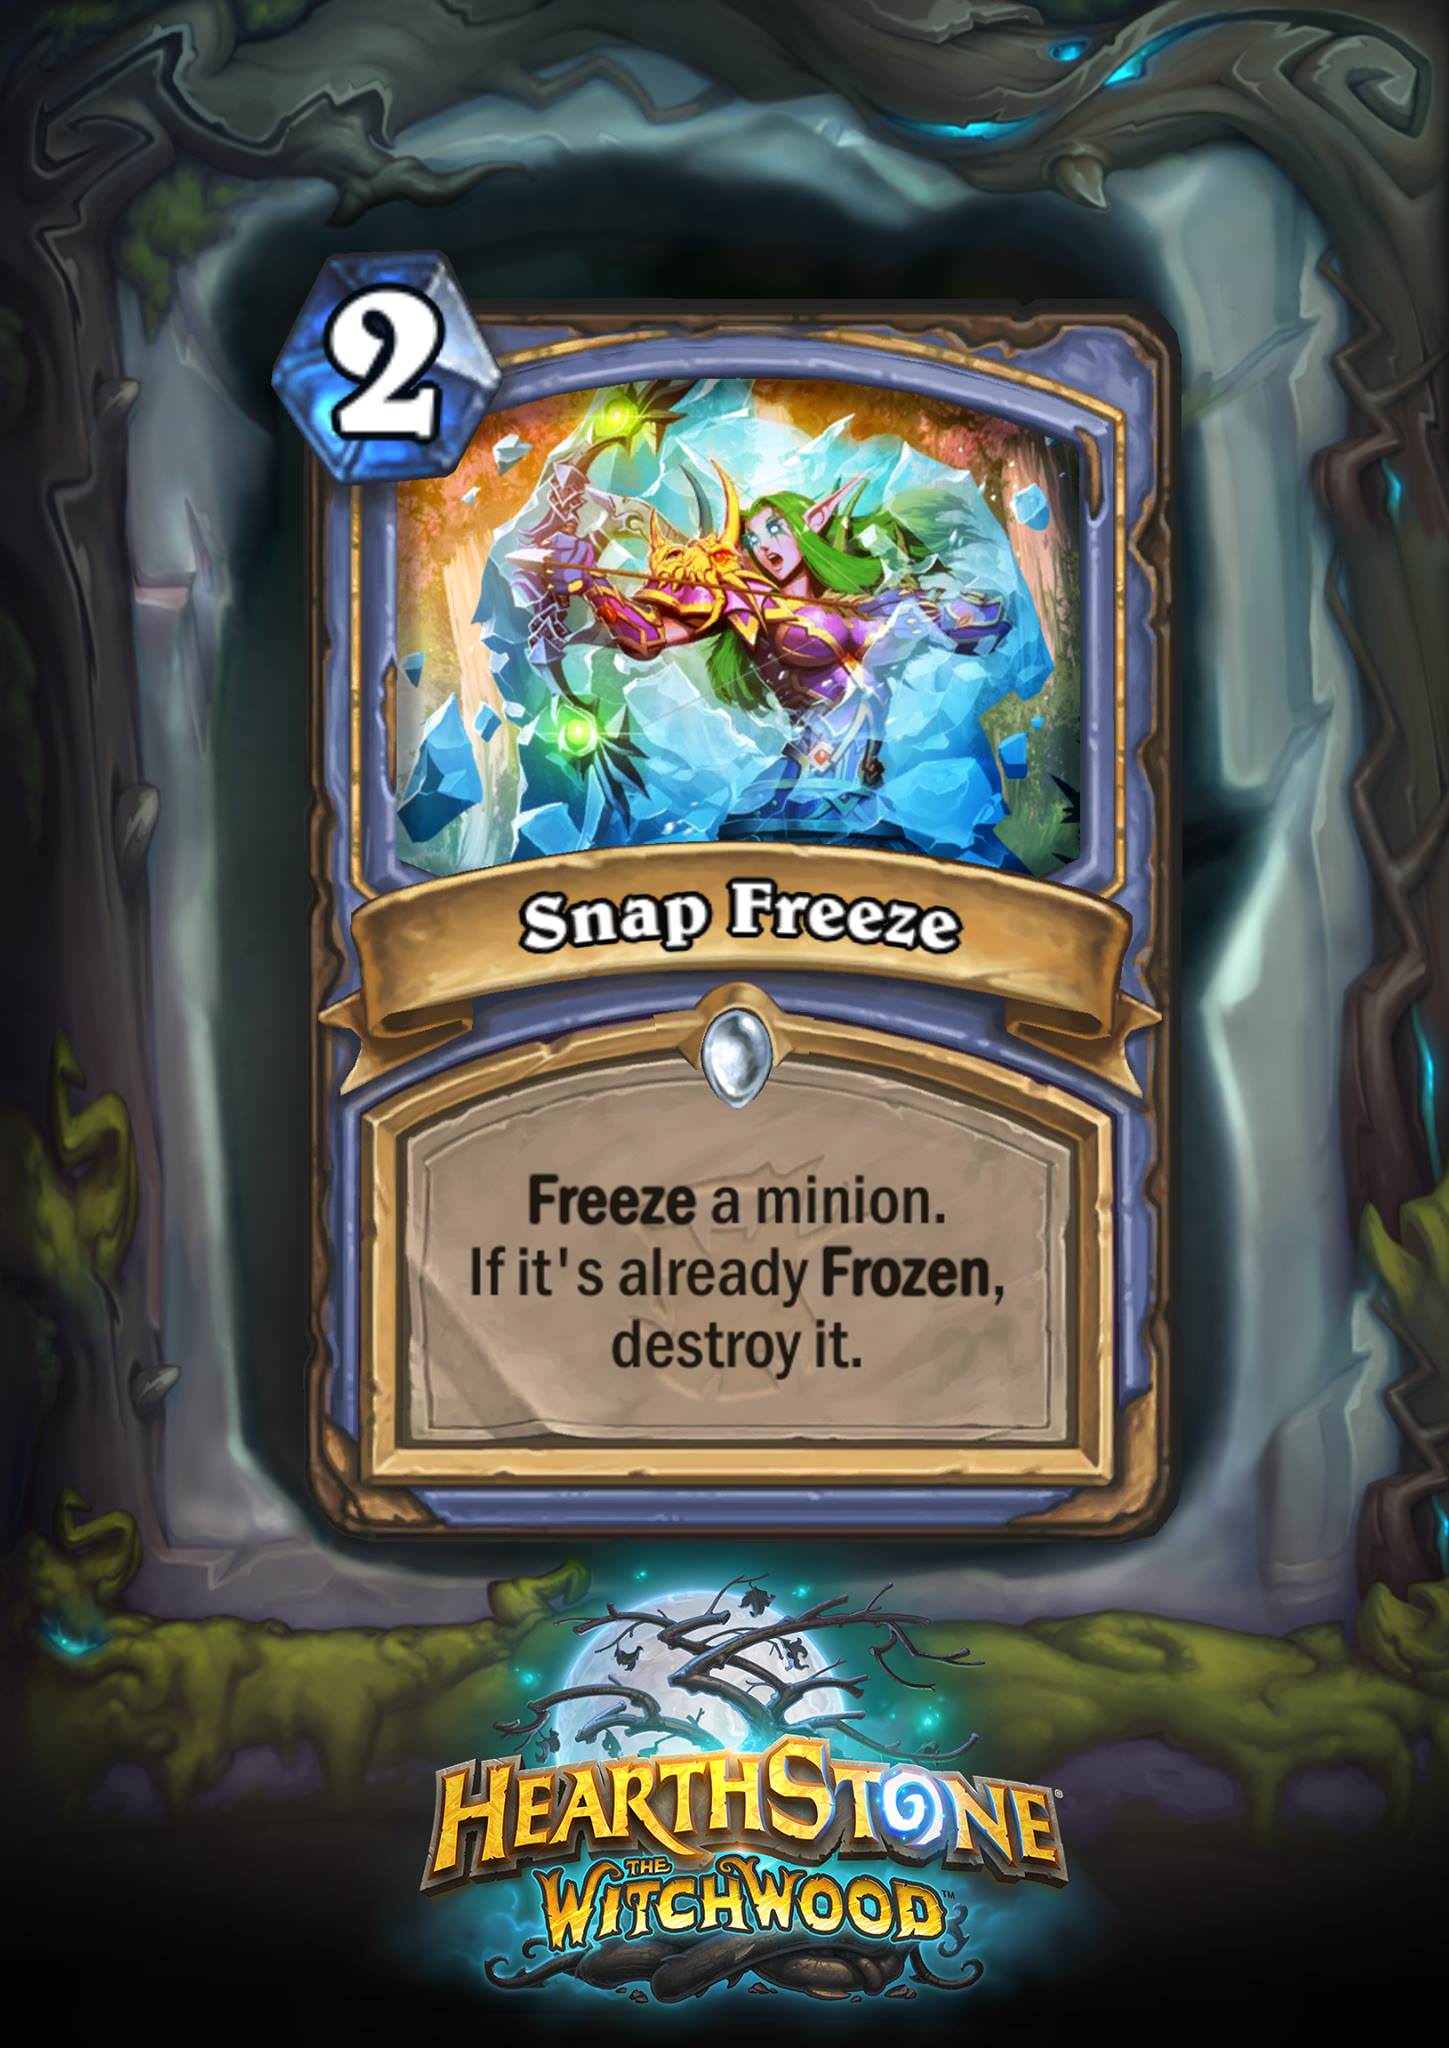 Hearthstone: The Witchwood: New Mage card revealed, Snap Freeze